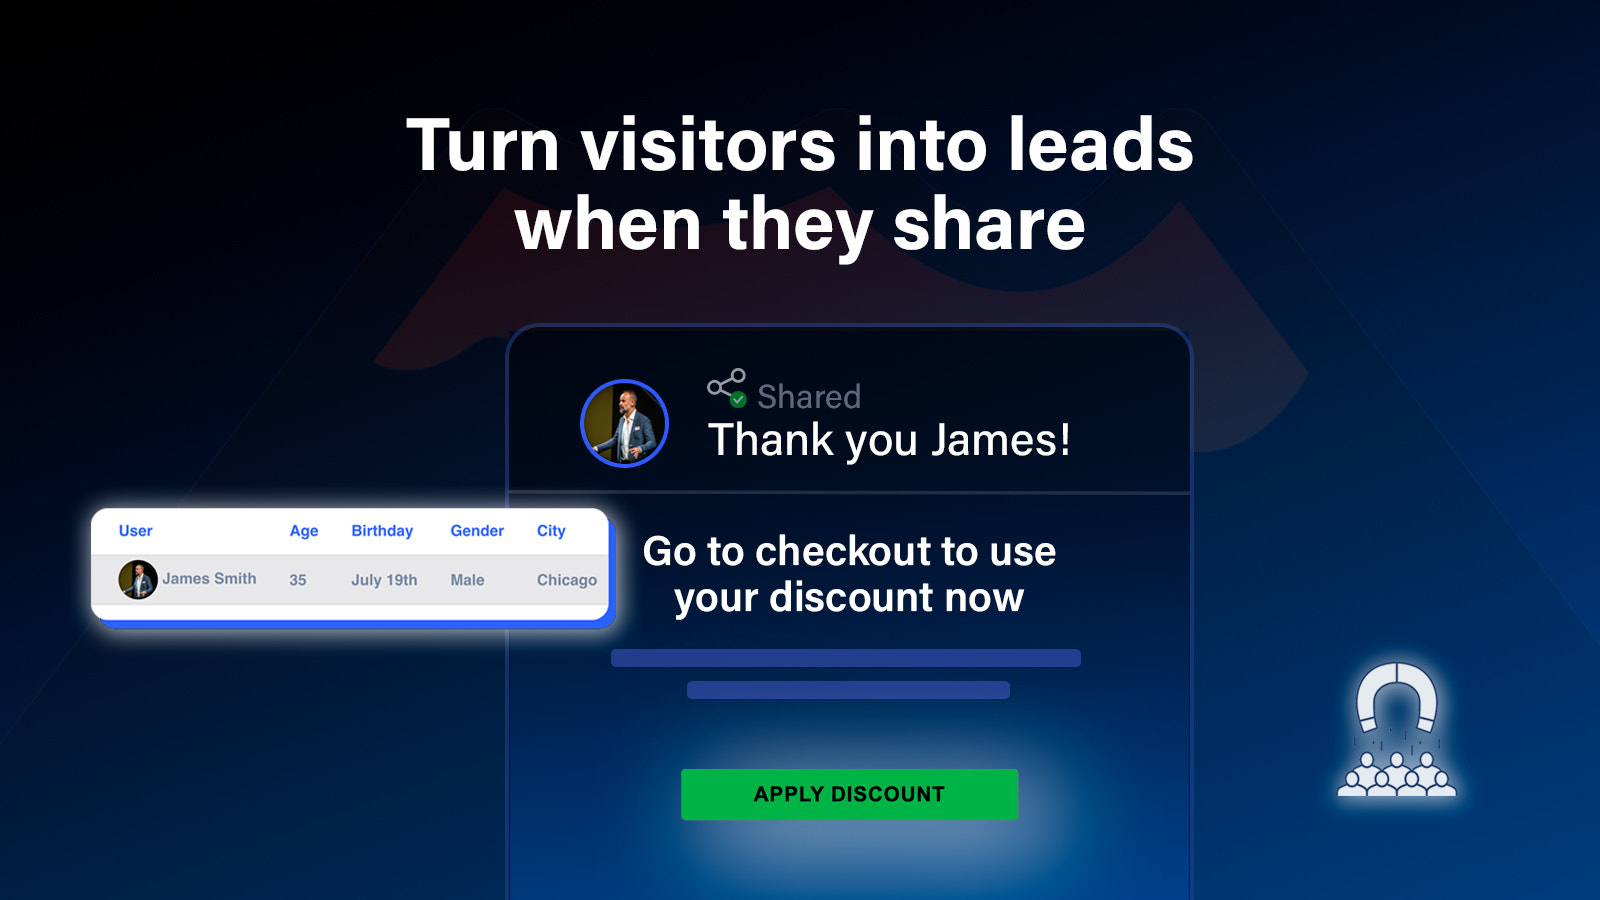 Turn visitors into leads when they share